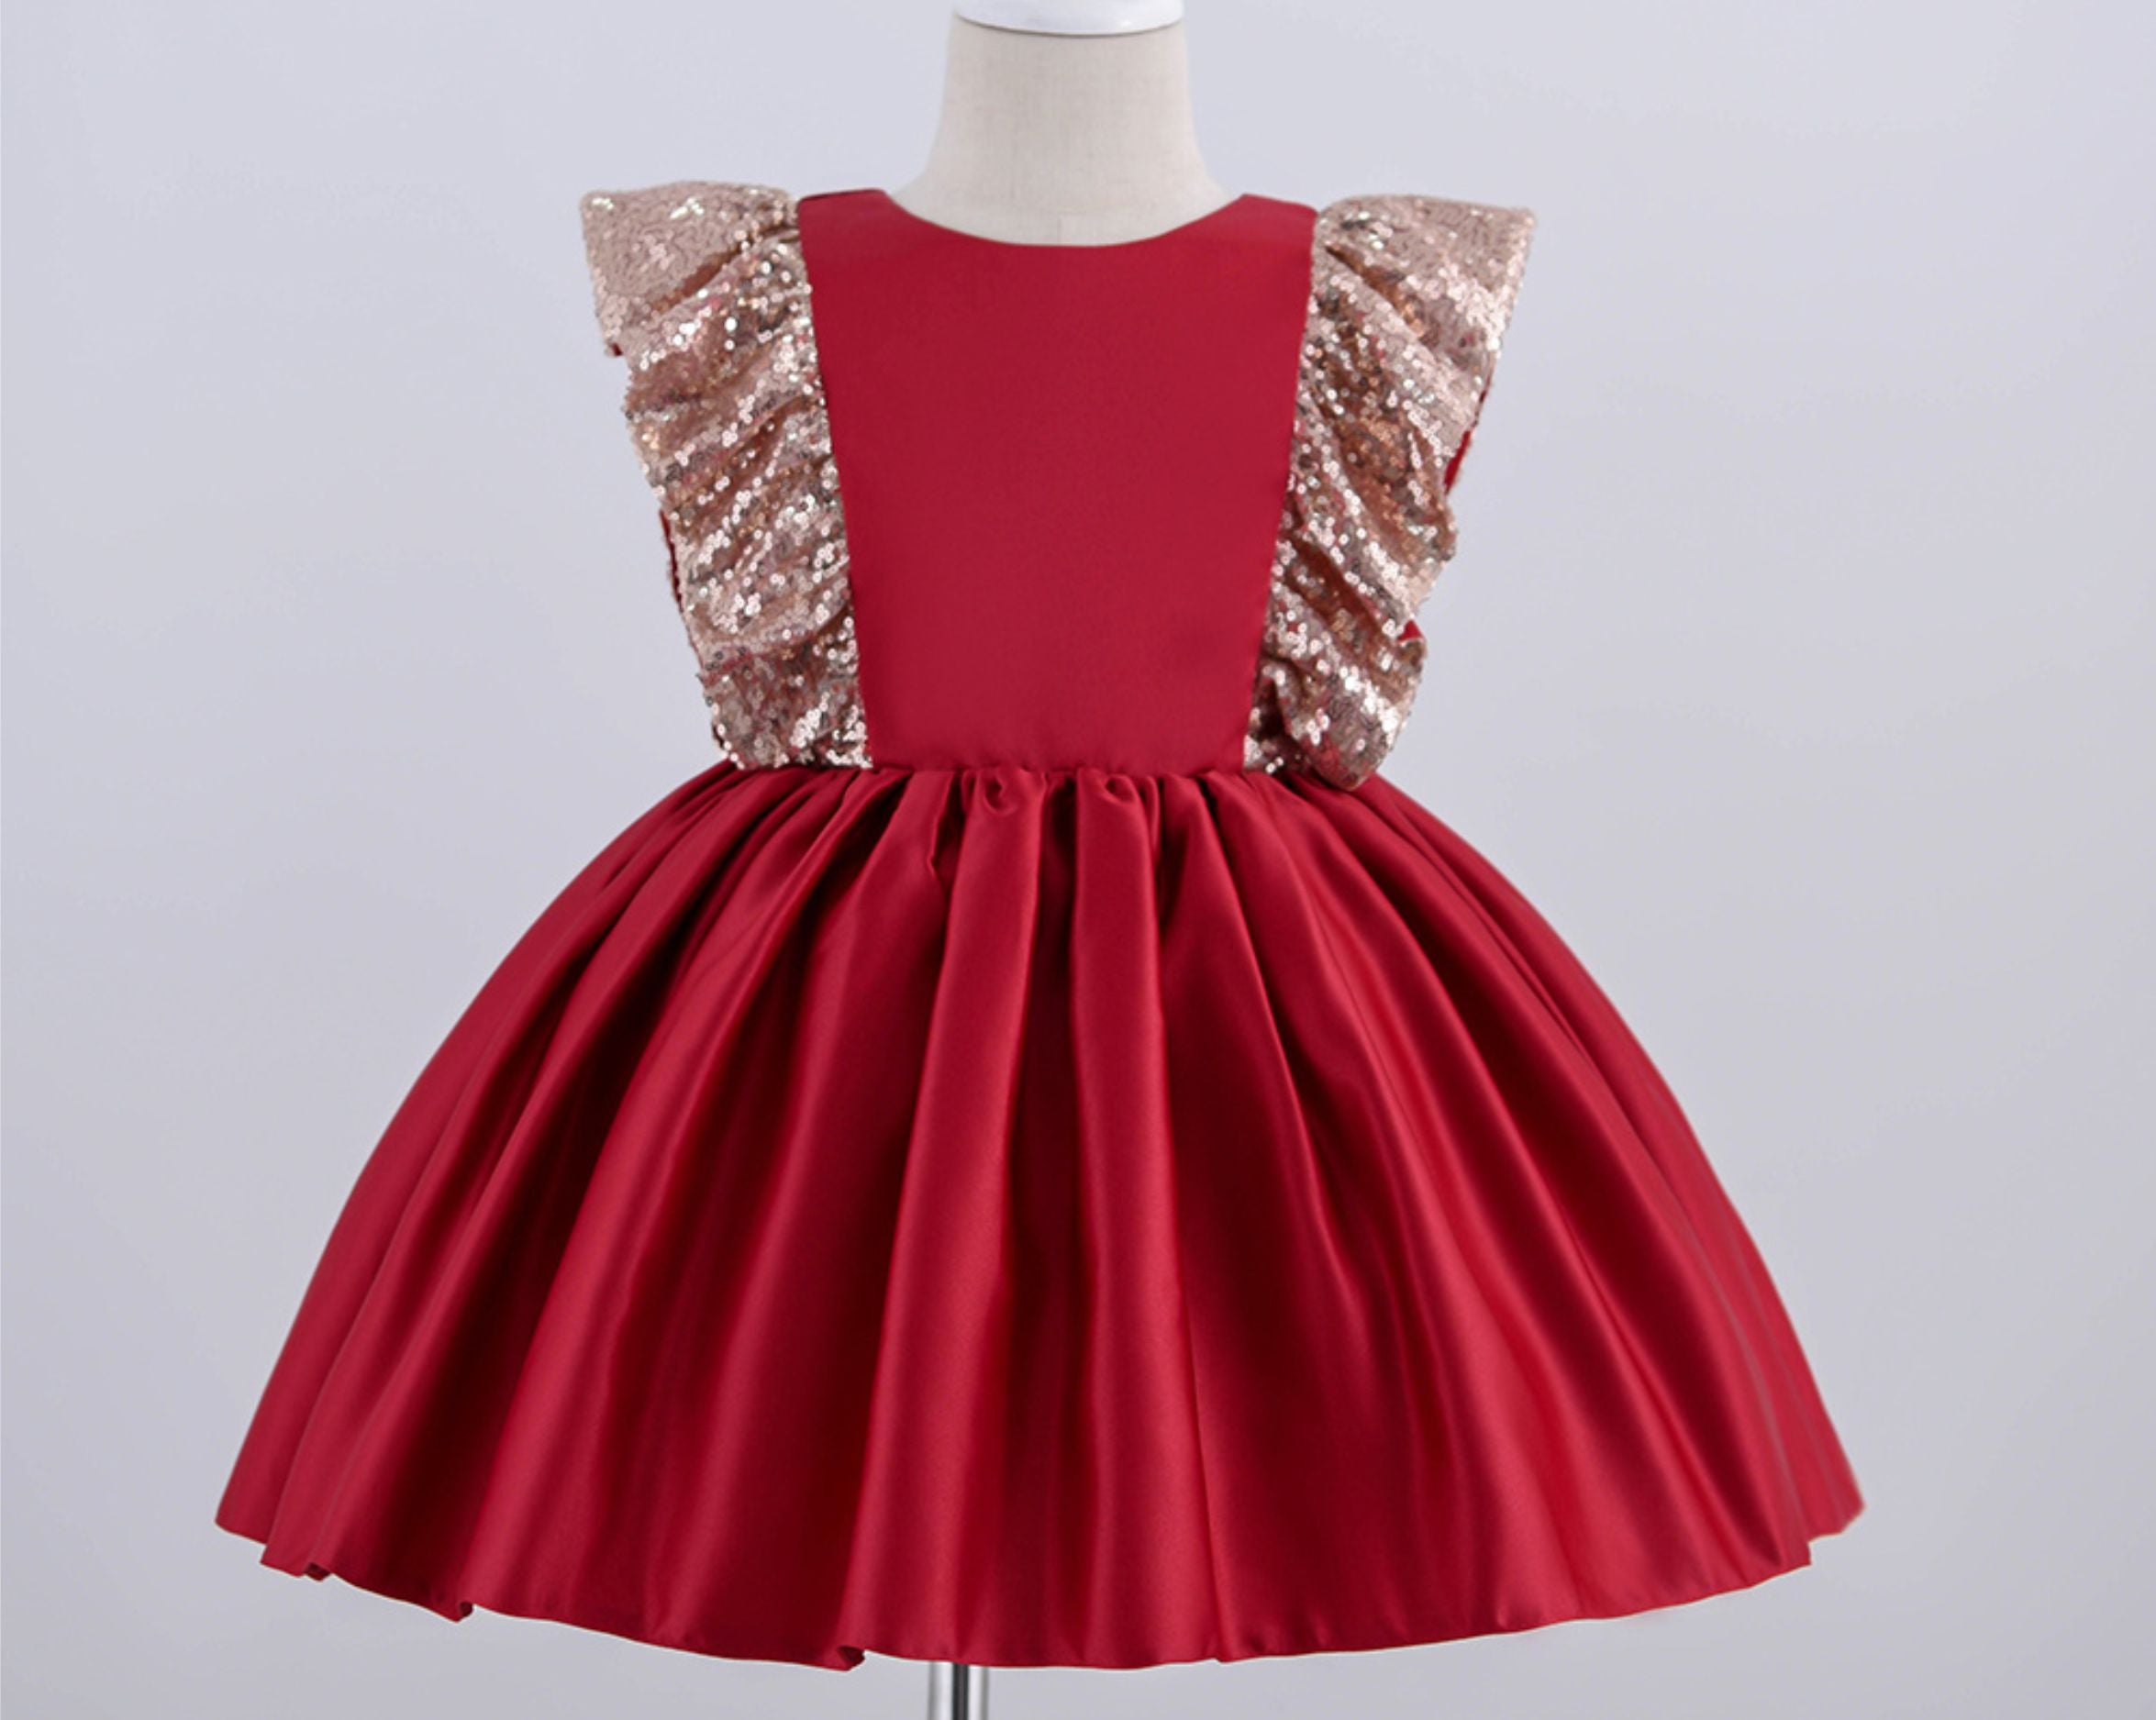 Kids Dresses For Girls Princess Wedding Christmas Party Dress Girl Clothes  3 To 10 Years Teenage Girl Frock Dress Flower Girls Dress FG1344 From  A_beautiful_dress, $49.25 | DHgate.Com